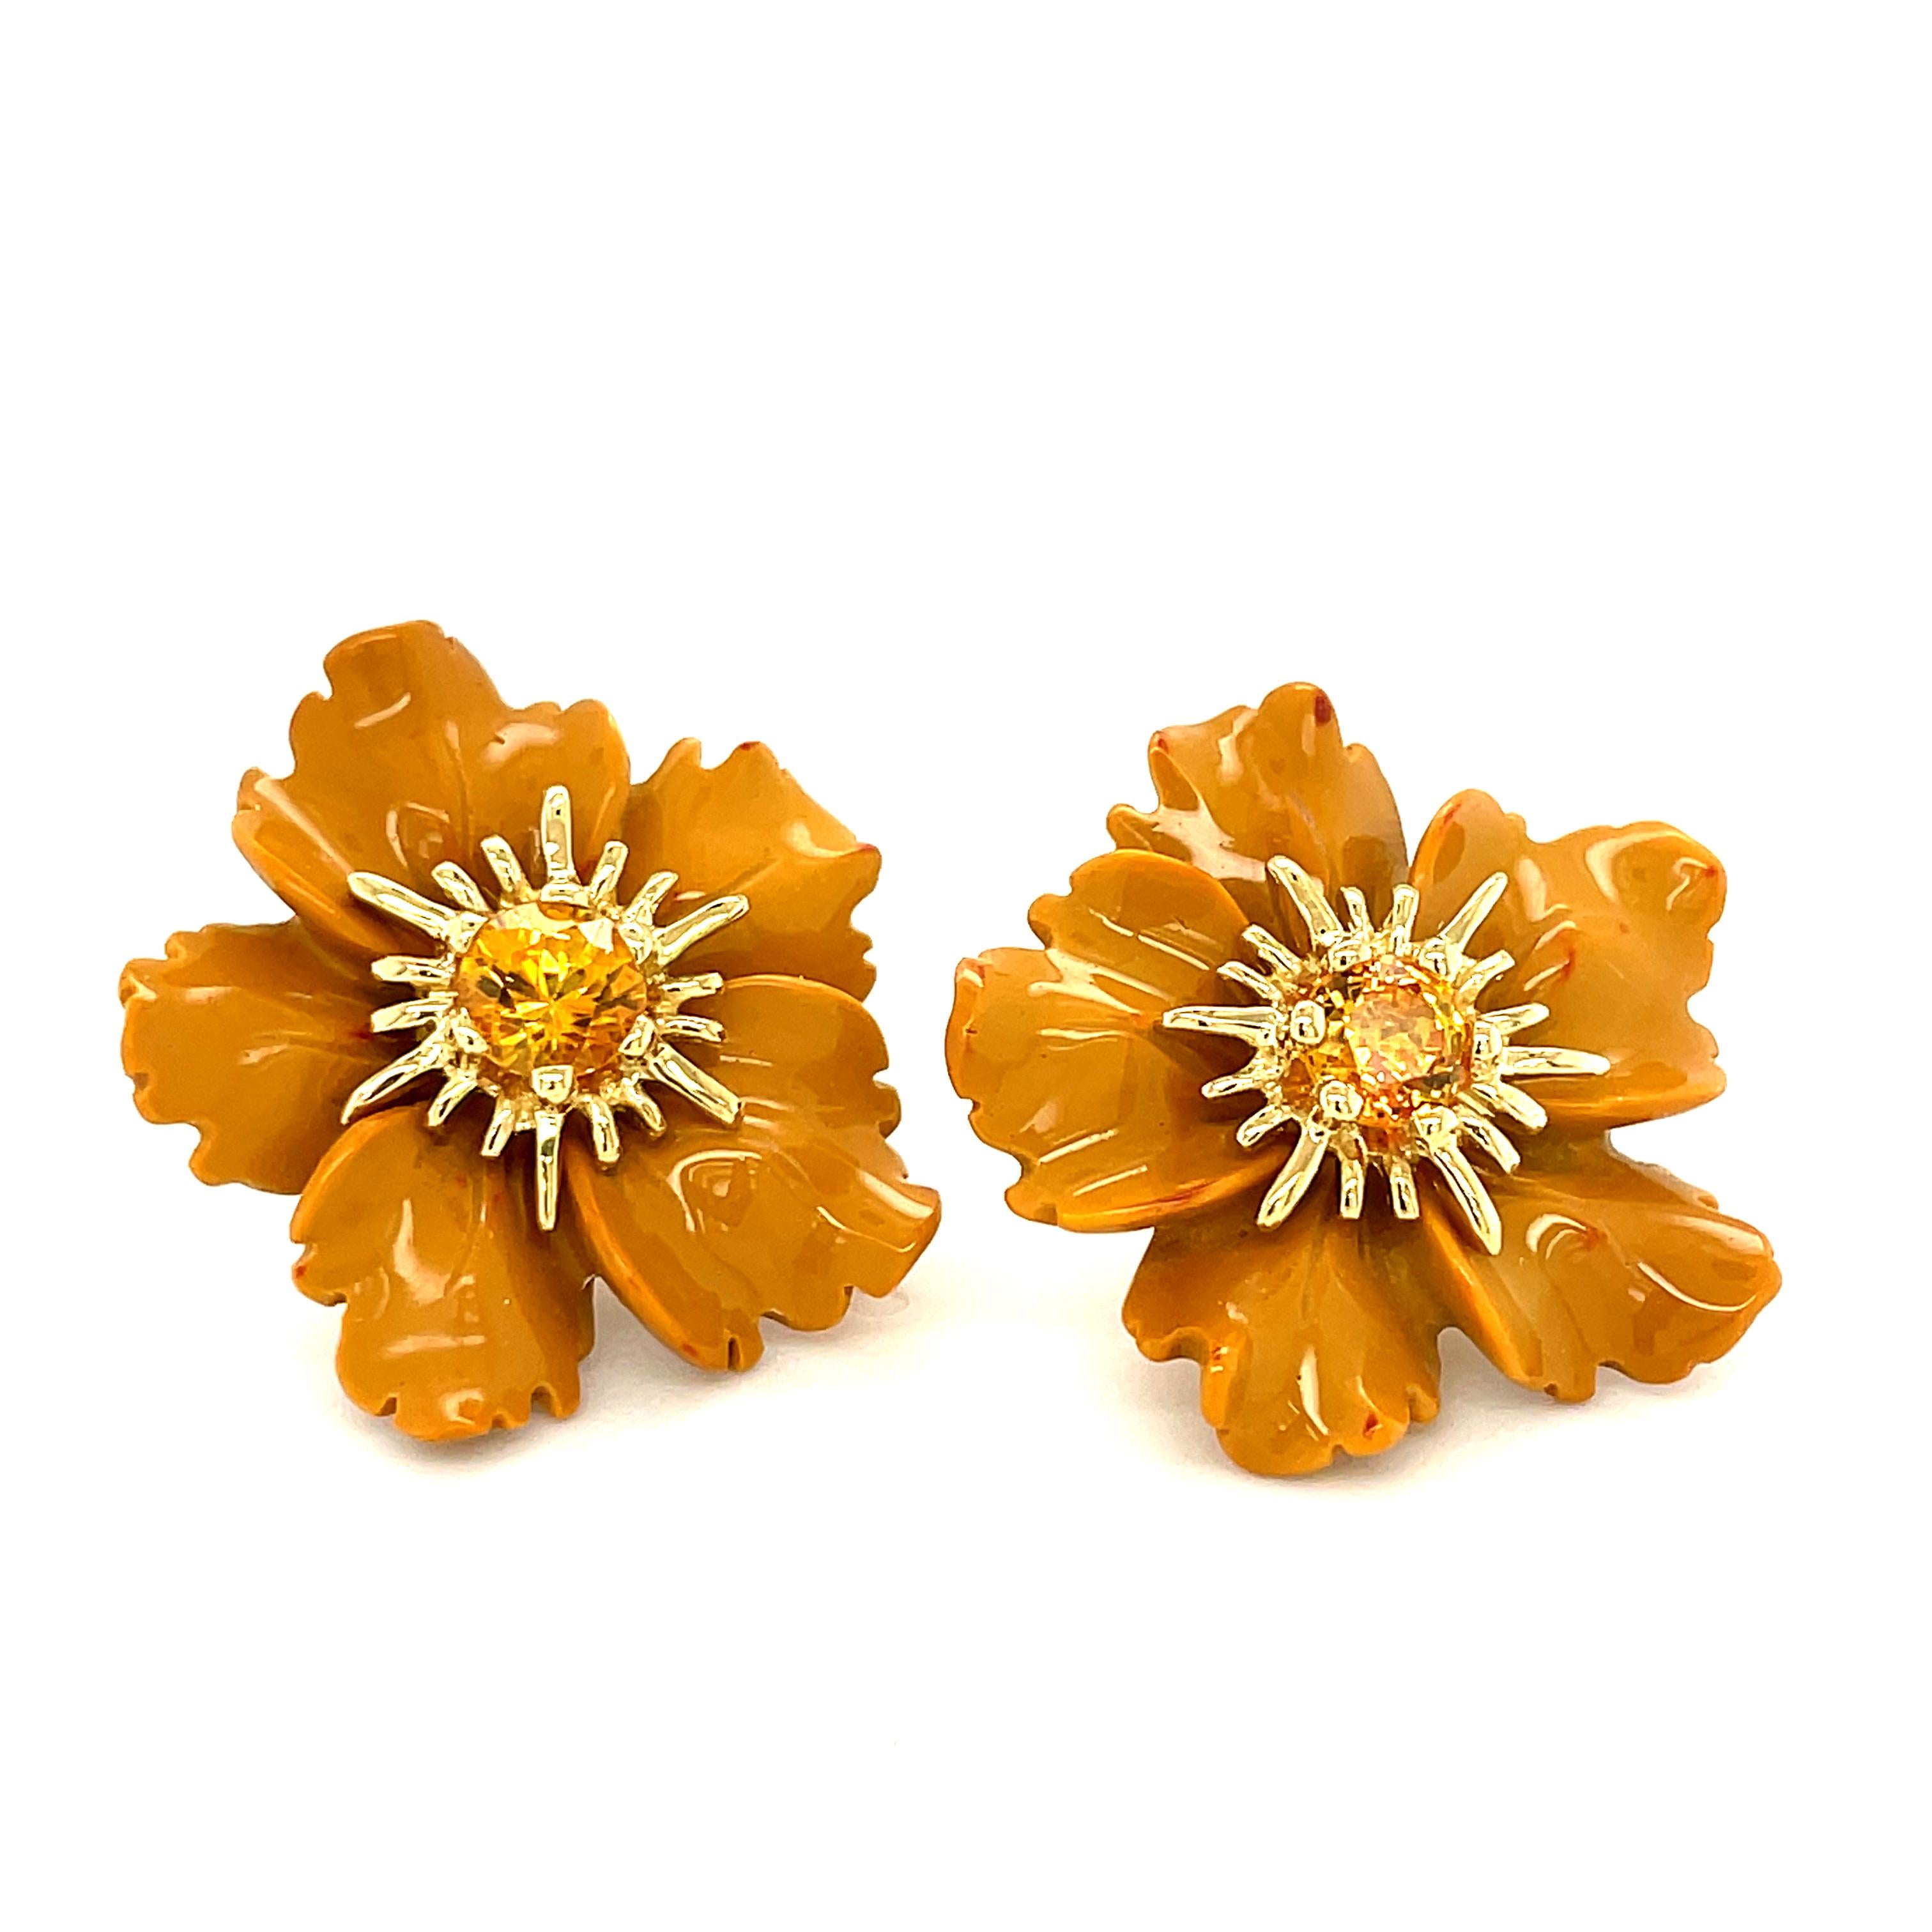 Brilliant Cut Carved Jasper Flower Earring Jacket with Yellow Sapphire and Gold Stamen Posts For Sale